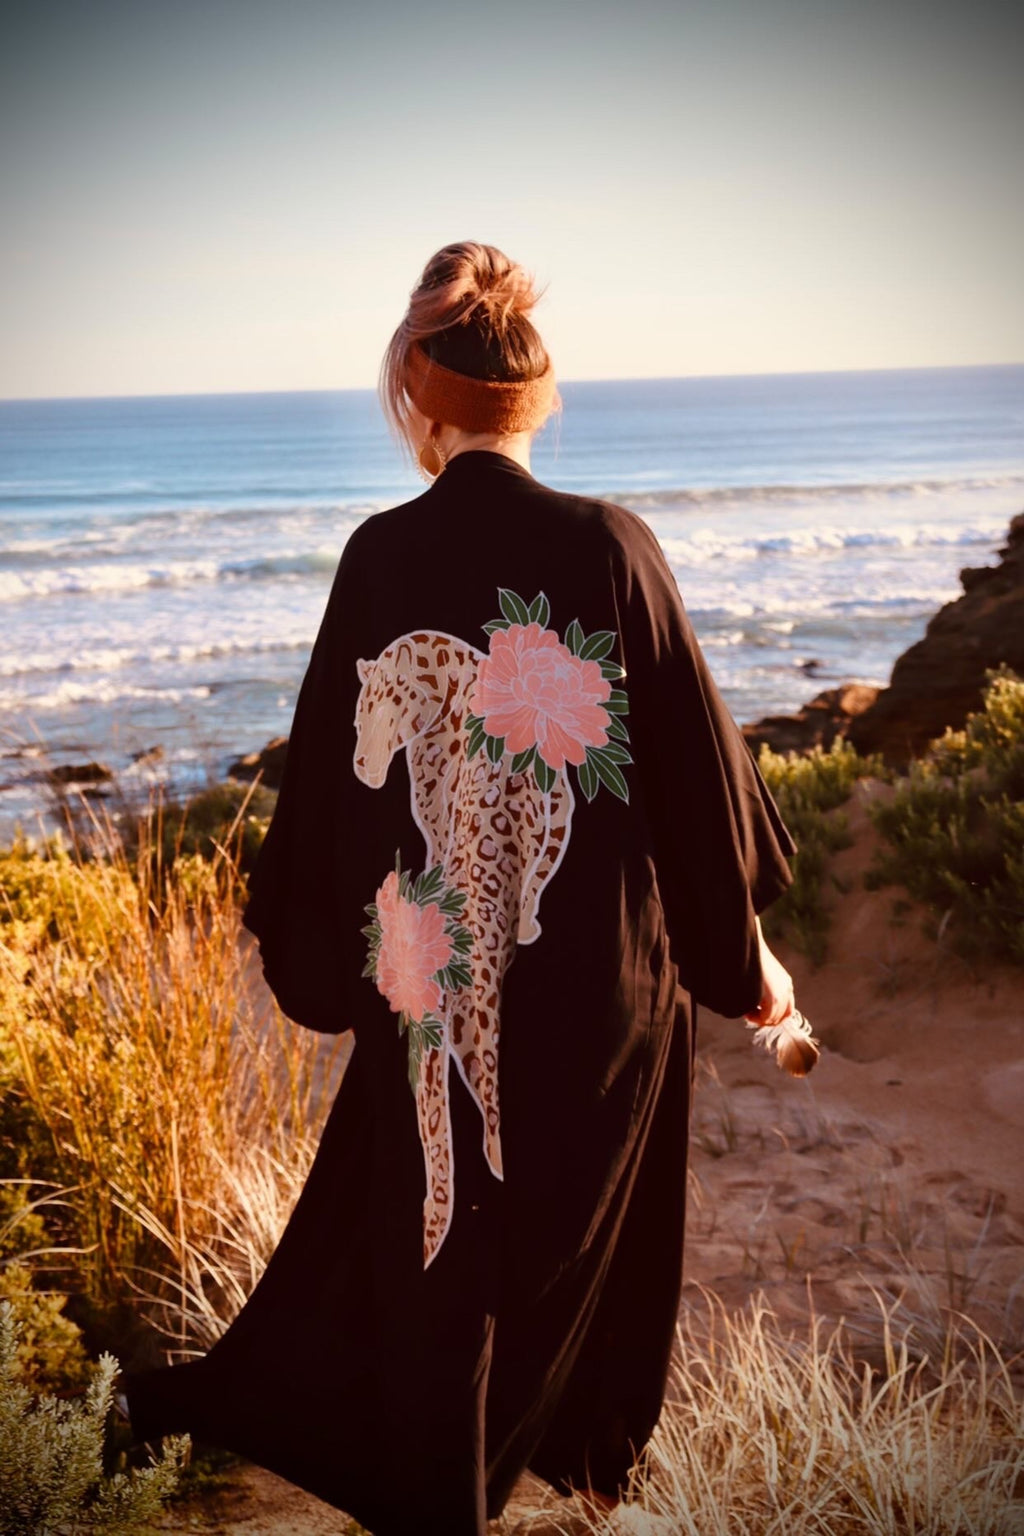 Thunder In Our Hearts Black -  Wide Sleeve Robe